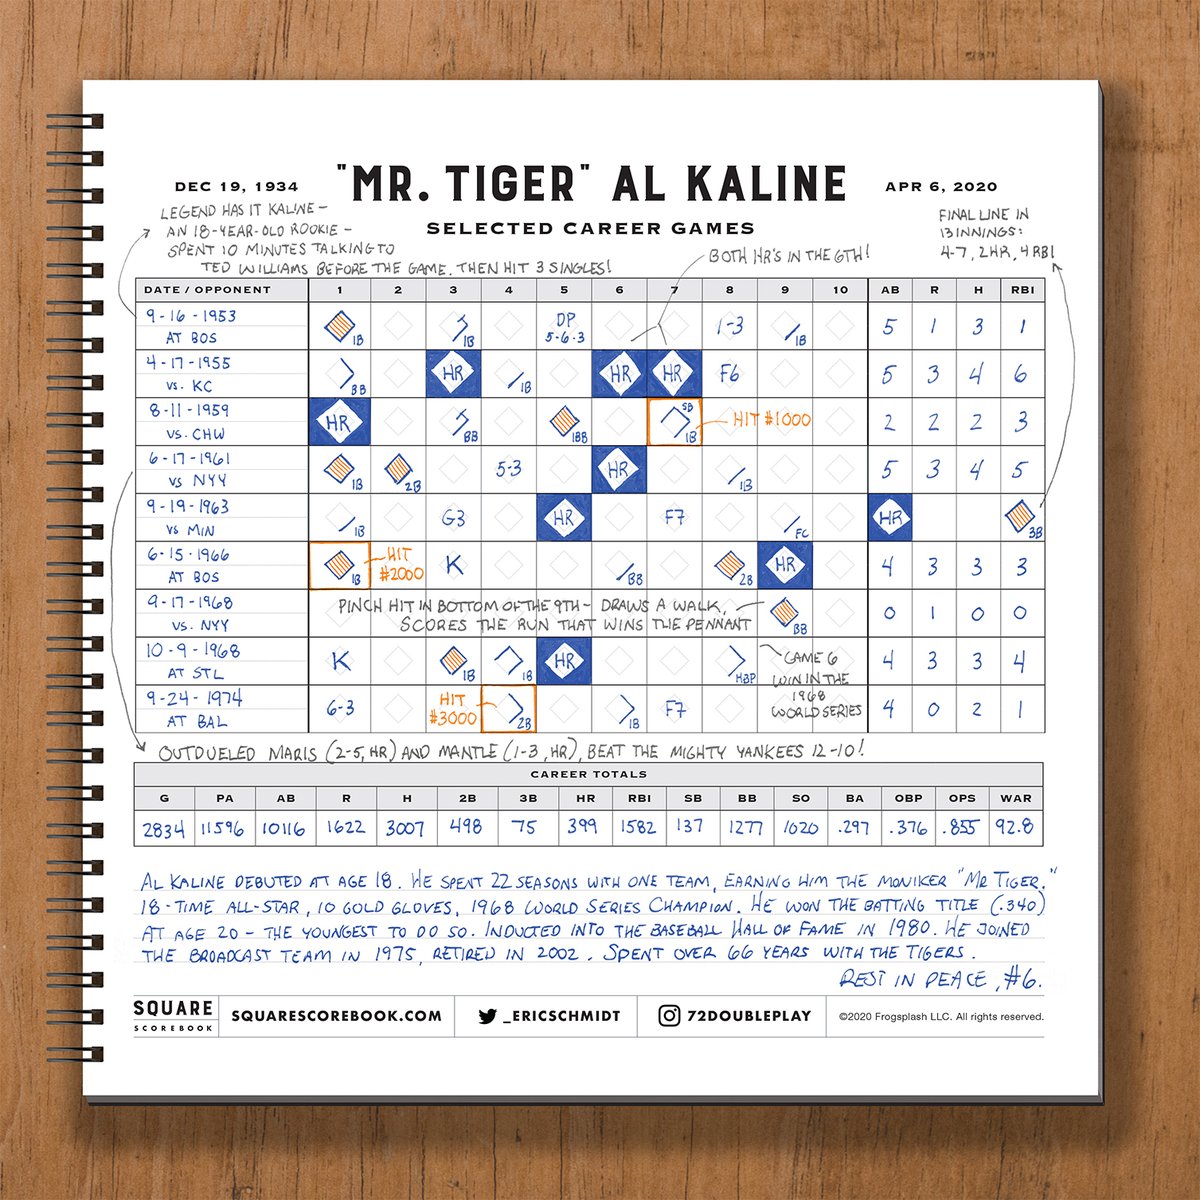 Al Kaline retired as a player two months after I was born – I mostly knew him as an announcer. Last night I went digging into his records on  @baseball_ref, and did a modified scorebook of what I thought were some of his best games.  #RIPMrTiger A thread: